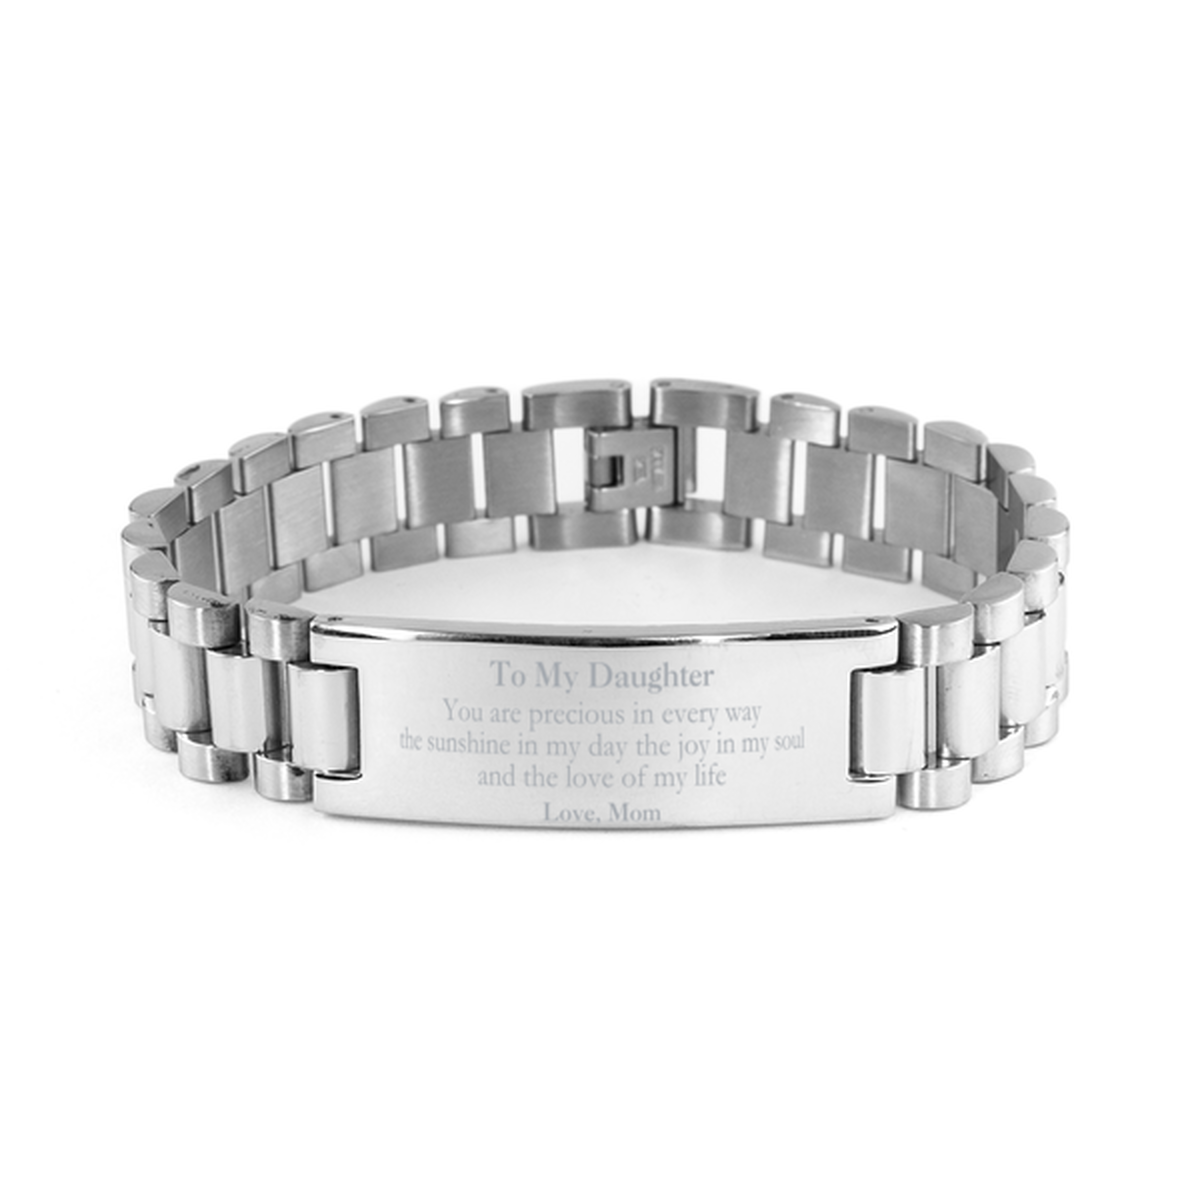 Graduation Gifts for Daughter Ladder Stainless Steel Bracelet Present from Mom, Christmas Daughter Birthday Gifts Daughter You are precious in every way the sunshine in my day. Love, Mom